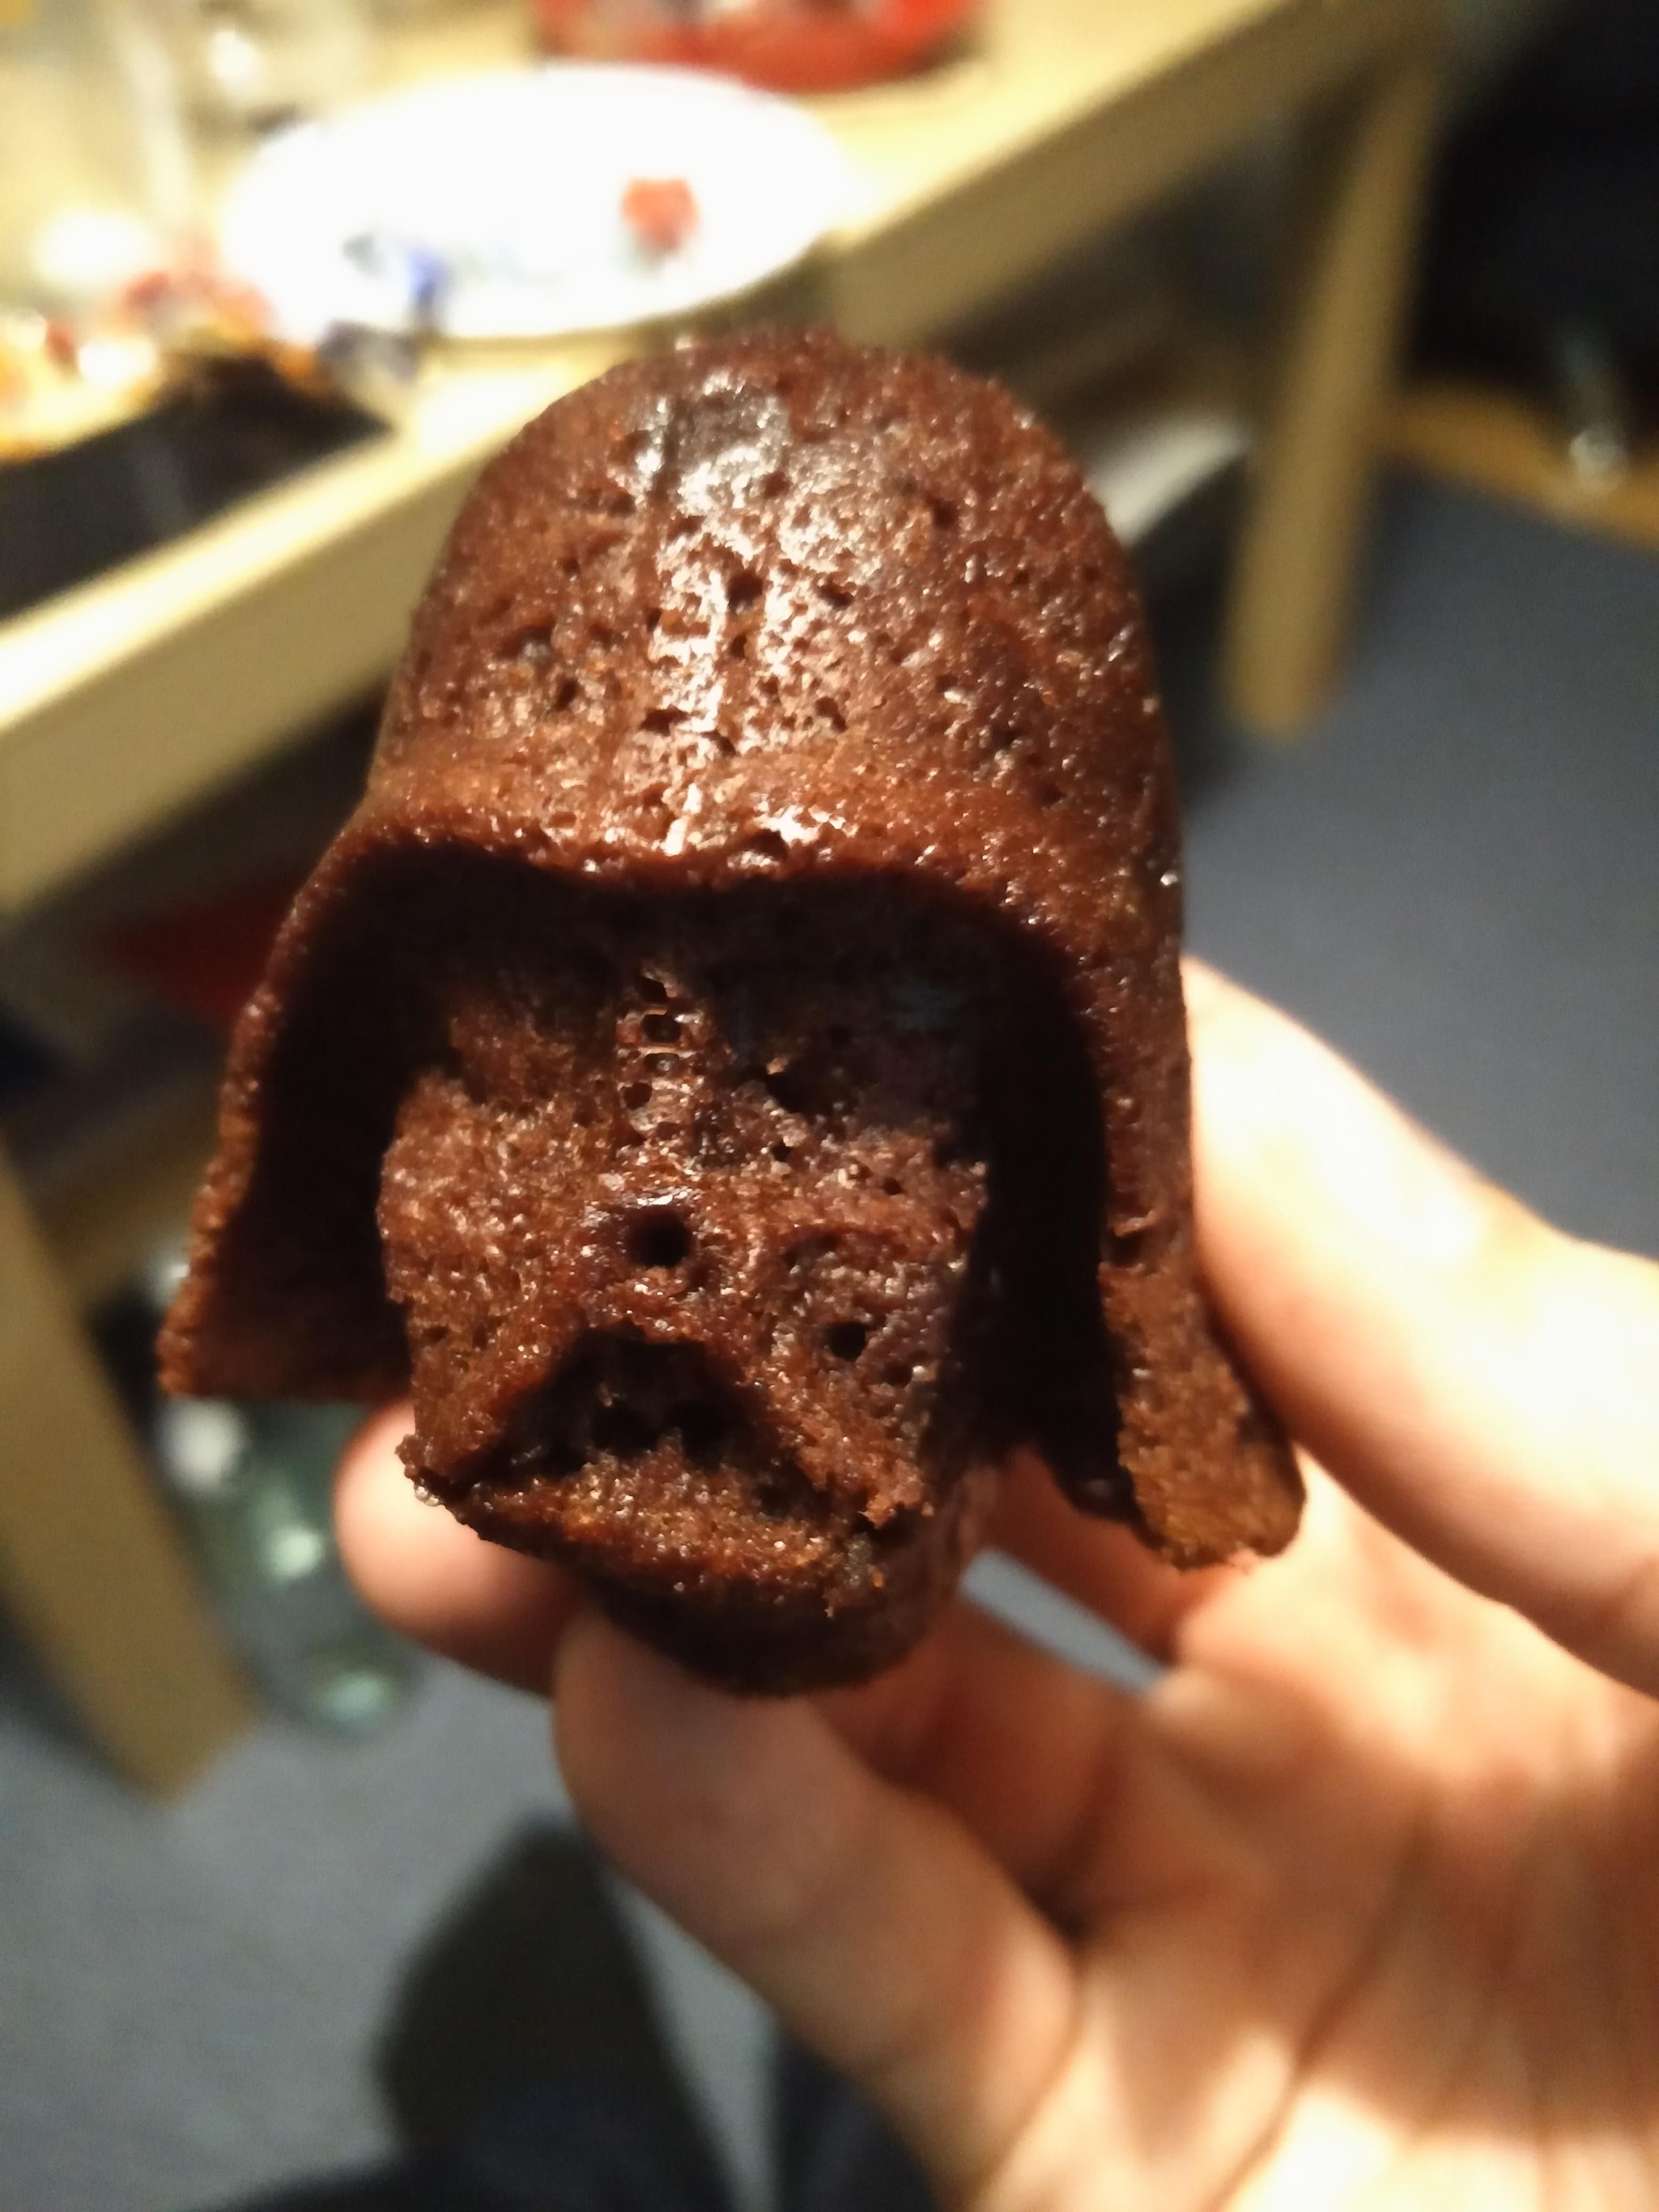 It's midnight, it's my birthday and my girlfriend just came in with a box of this: Vader Muffins. Should I marry her?